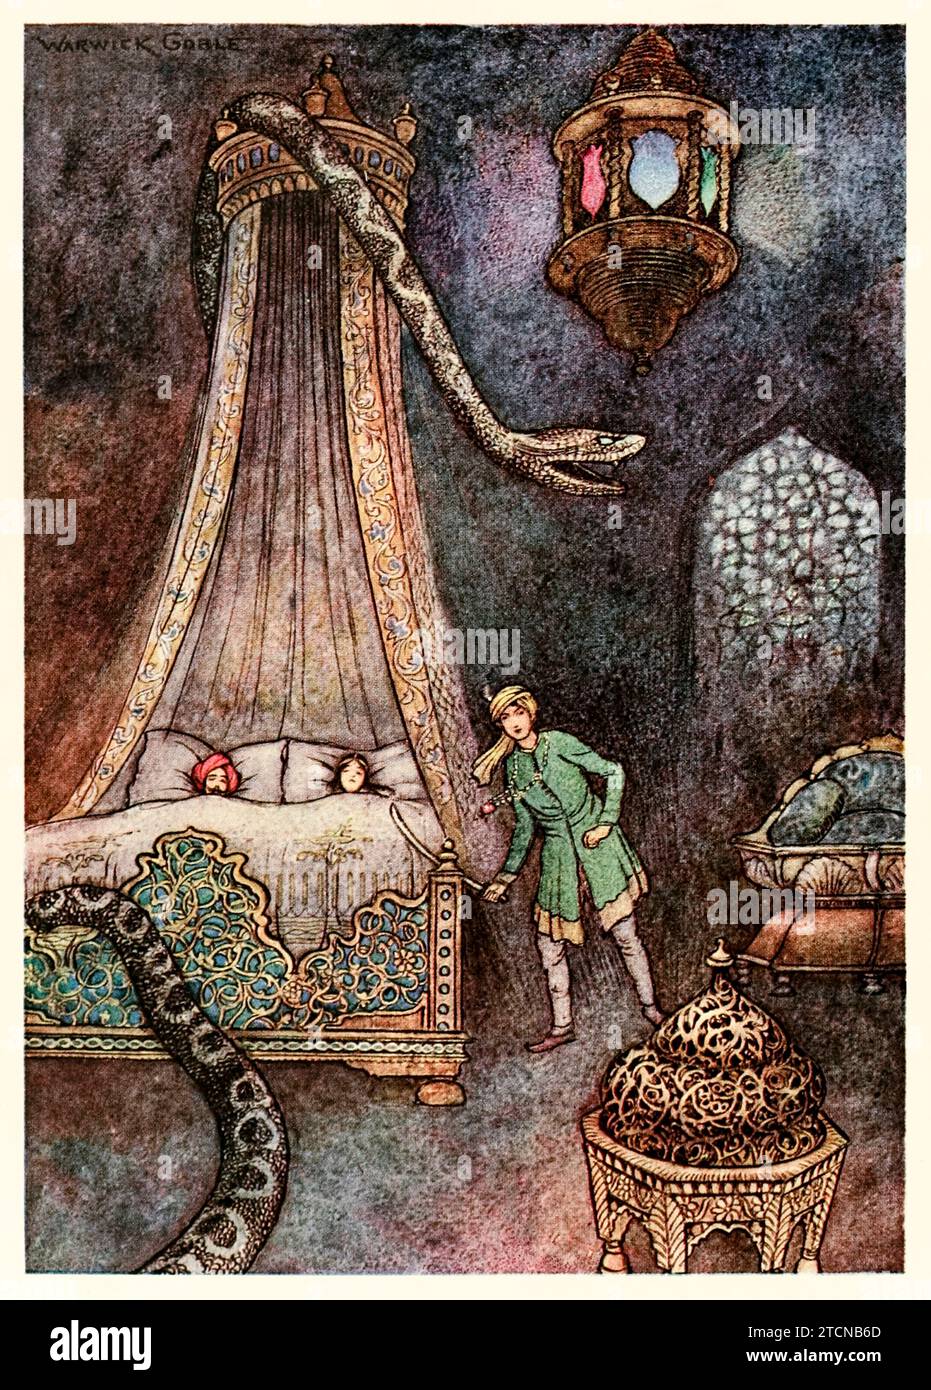 ‘He rushed out of his hiding-place and killed the serpent’ from ‘Folk-tales of Bengal’ by Lal Behari Day (1824-1882), illustration by Warwick Goble (1862-1972). Photograph from a 1912 edition. Credit: Private Collection / AF Fotografie Stock Photo